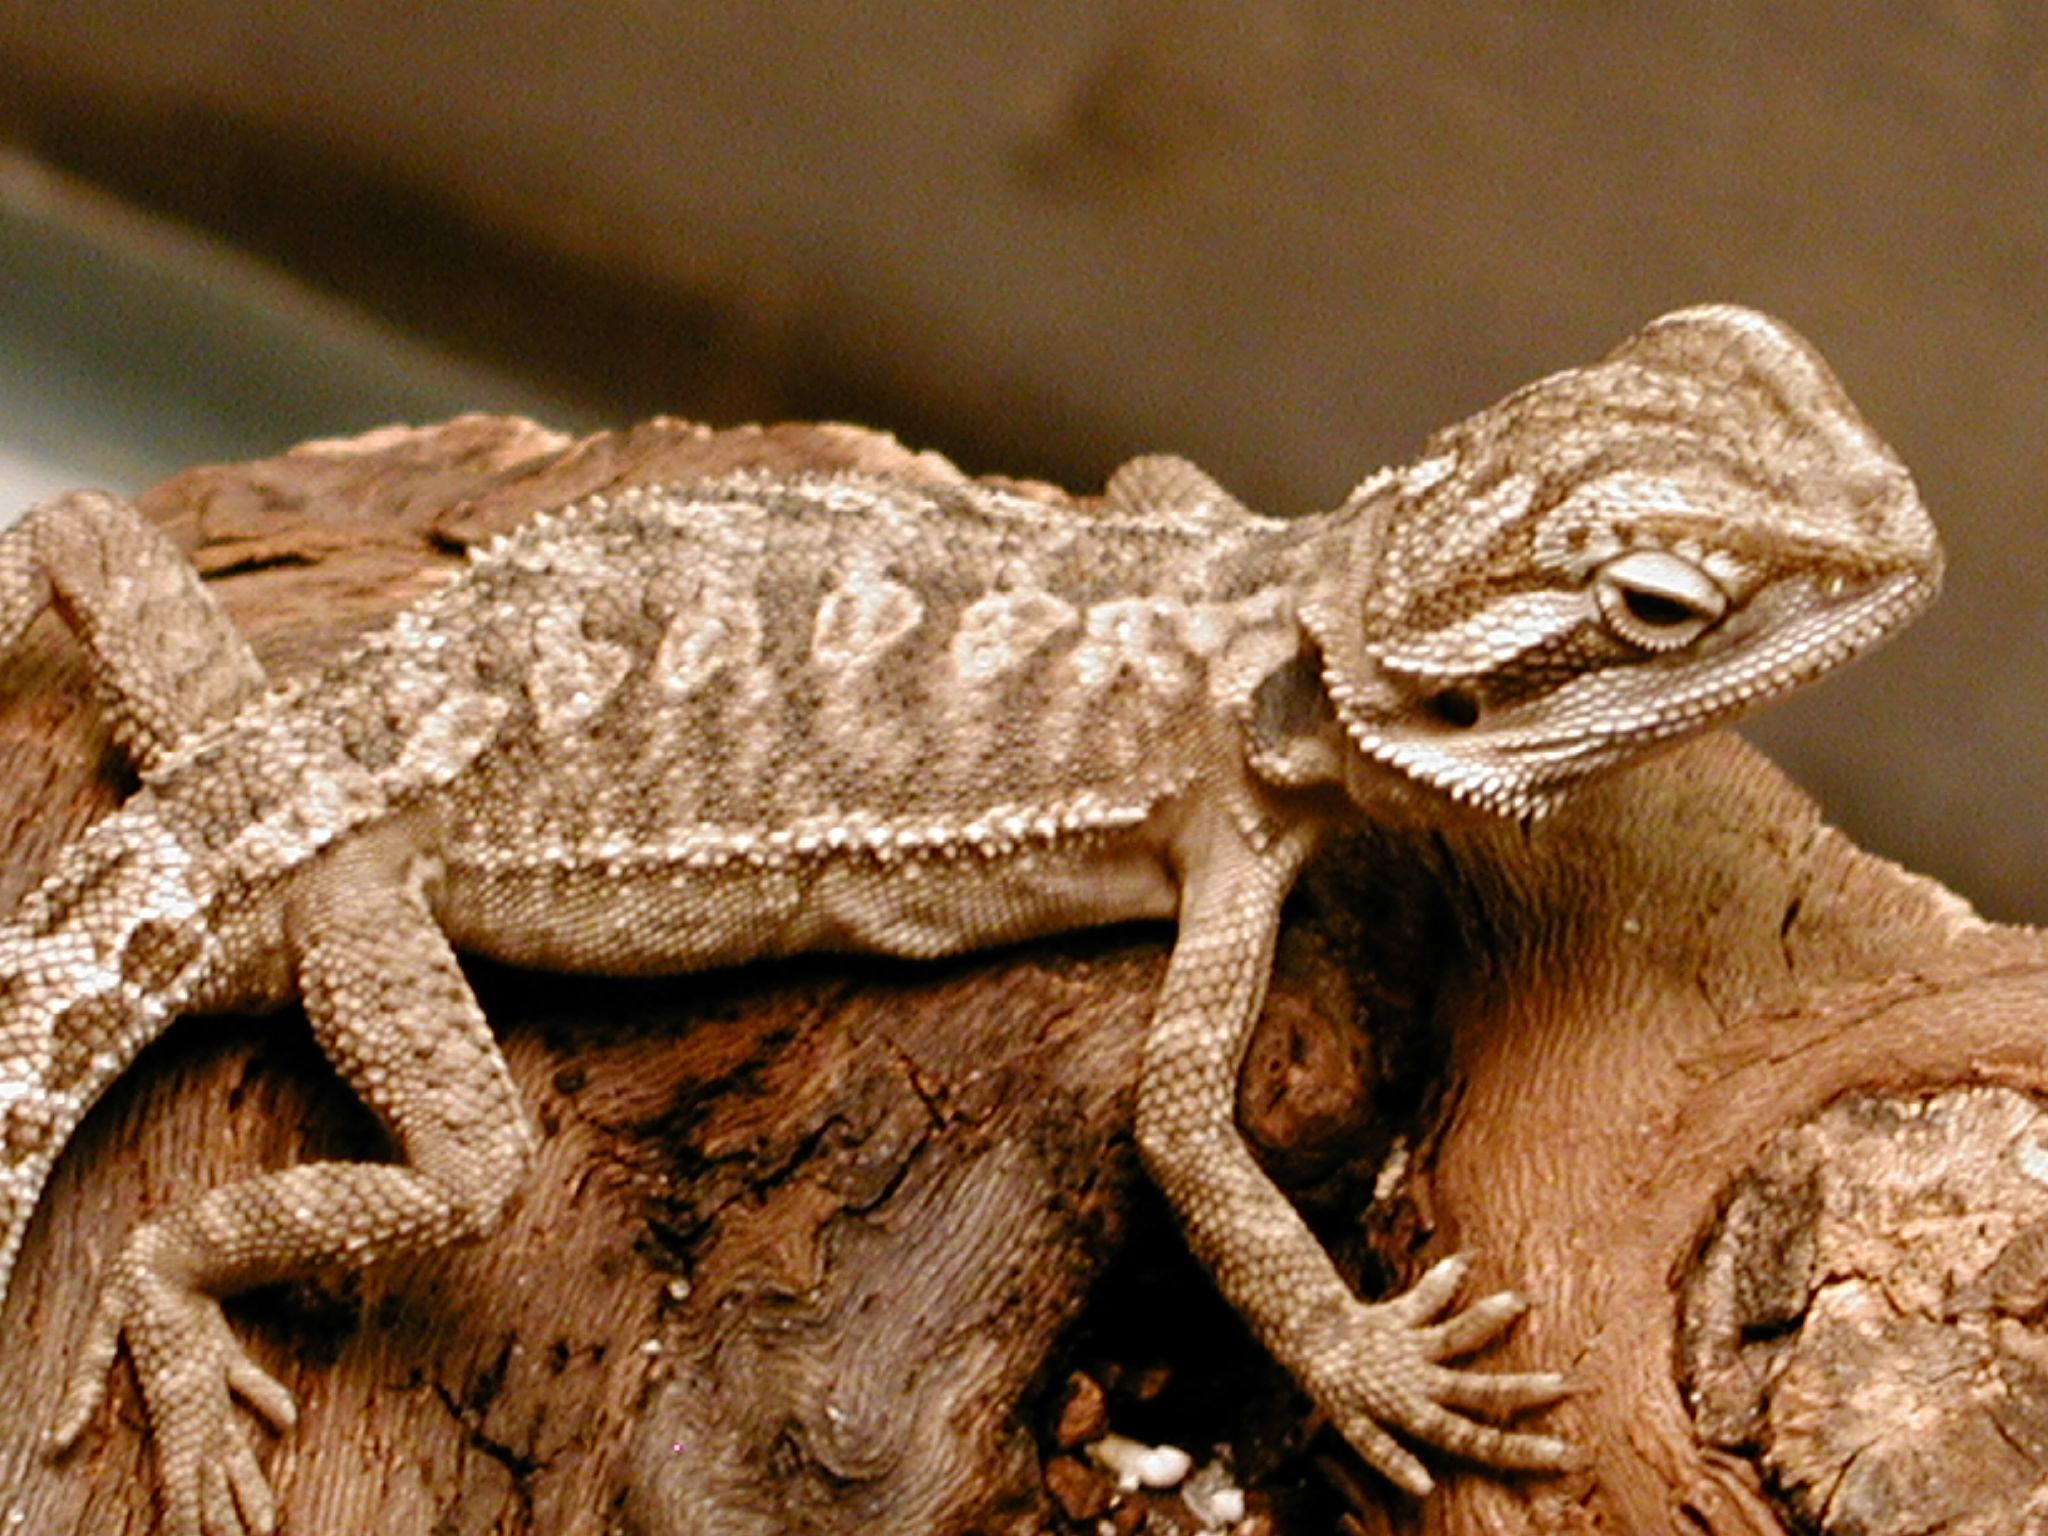 Set of Bearded Dragon Pictures . Image Gallery on Animal Picture ...